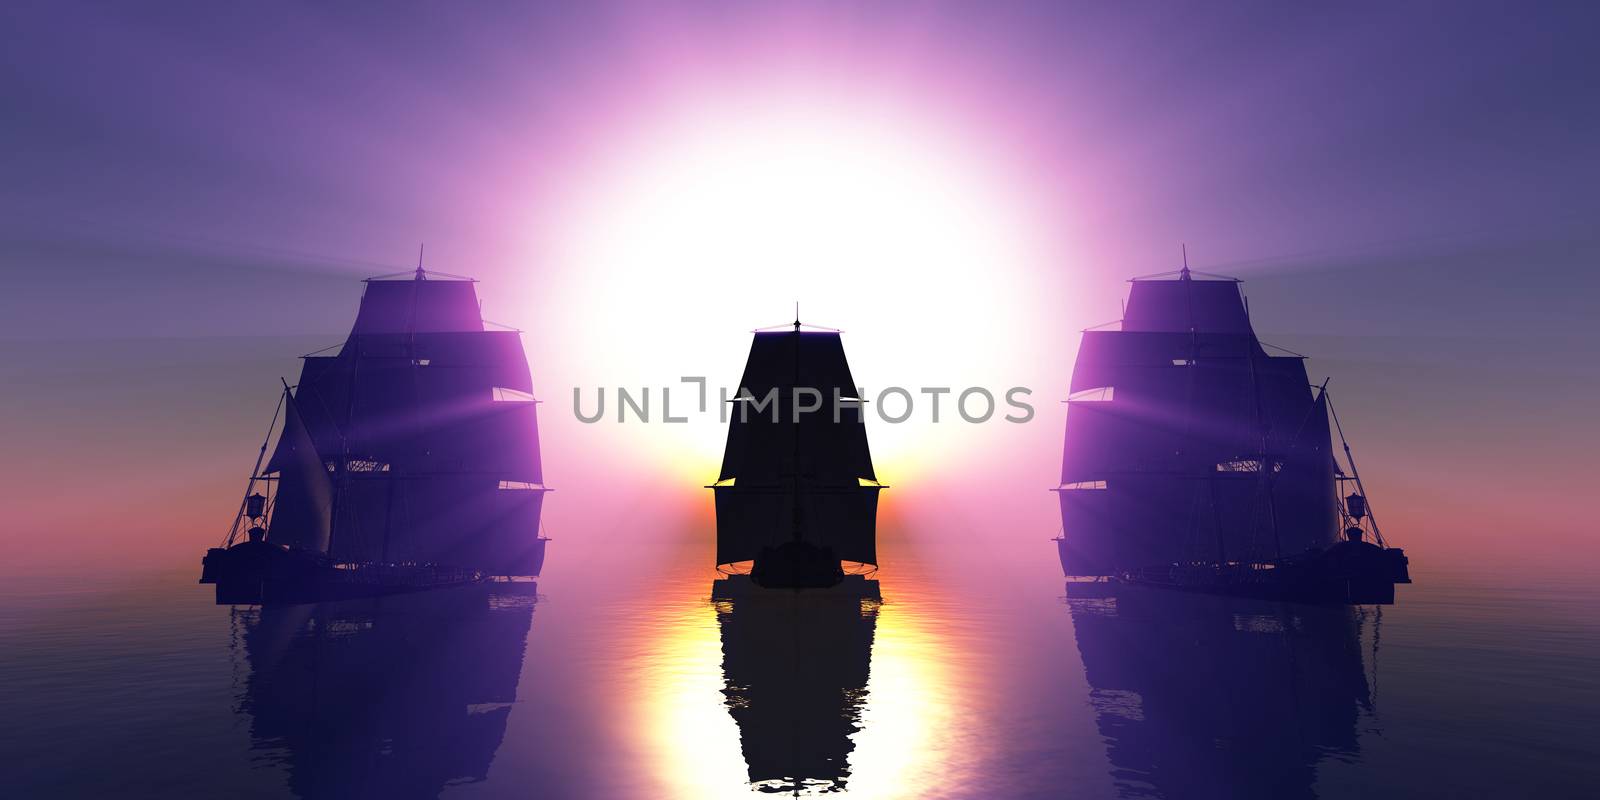 old three ships sunset at sea, 3d rendering illustration